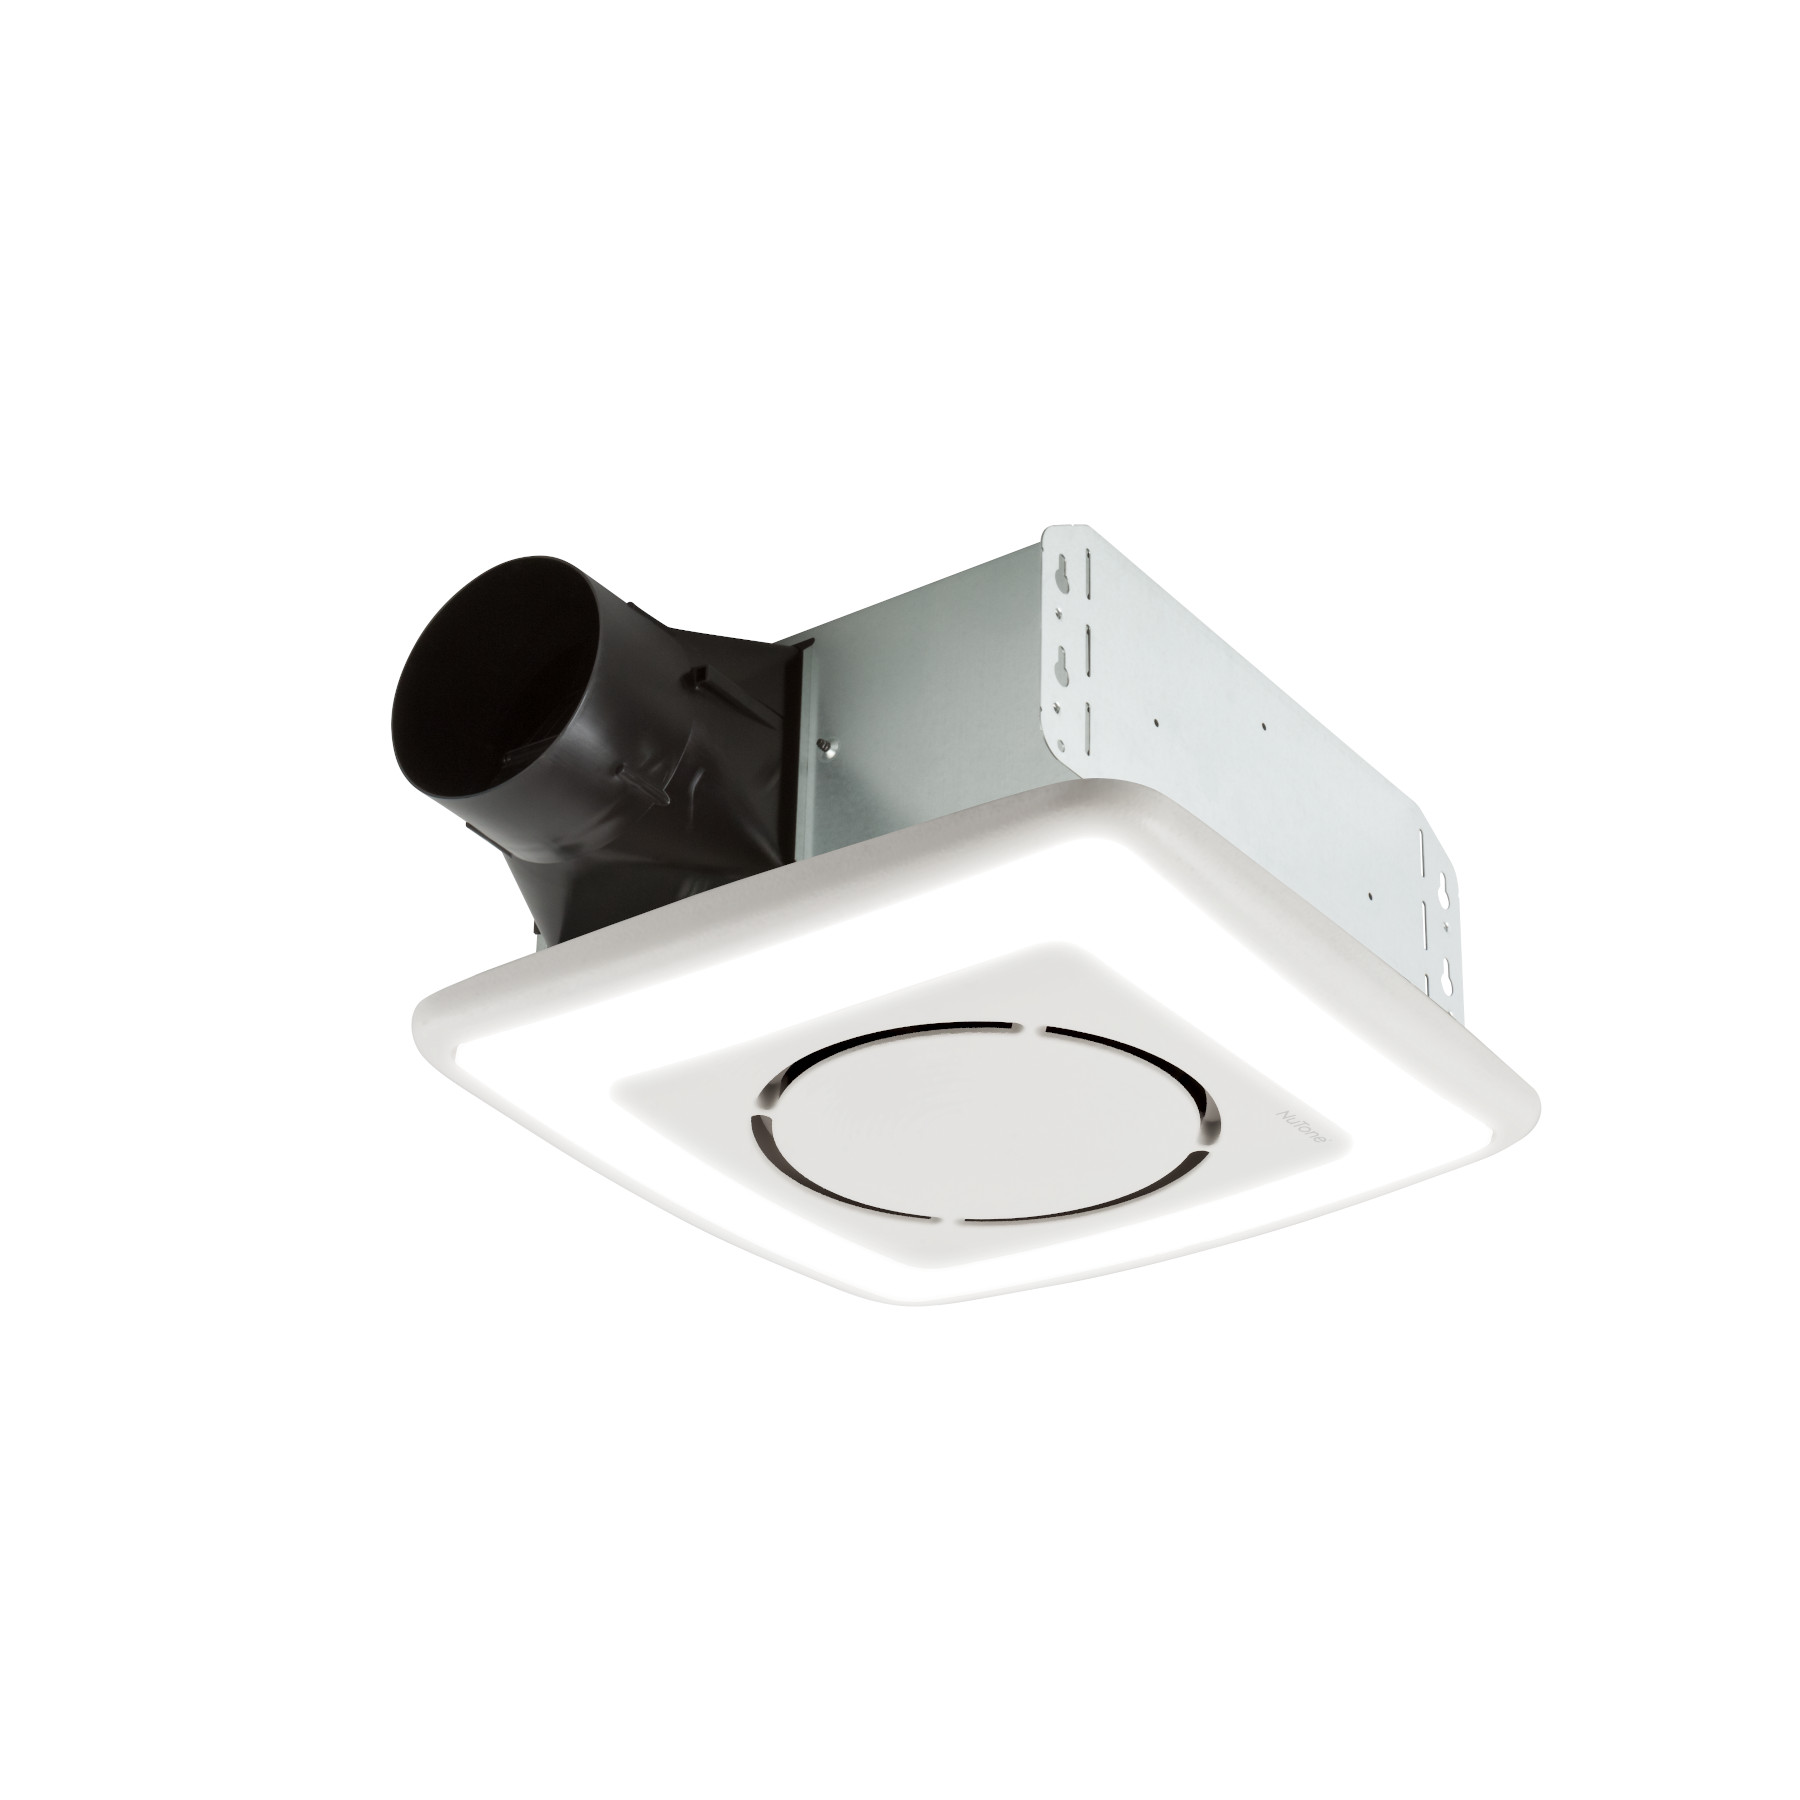 **DISCONTINUED** NuTone® Flex Series 110 CFM Ventilation Fan with LED lighting 1.5 Sones; ENERGY STAR® certified